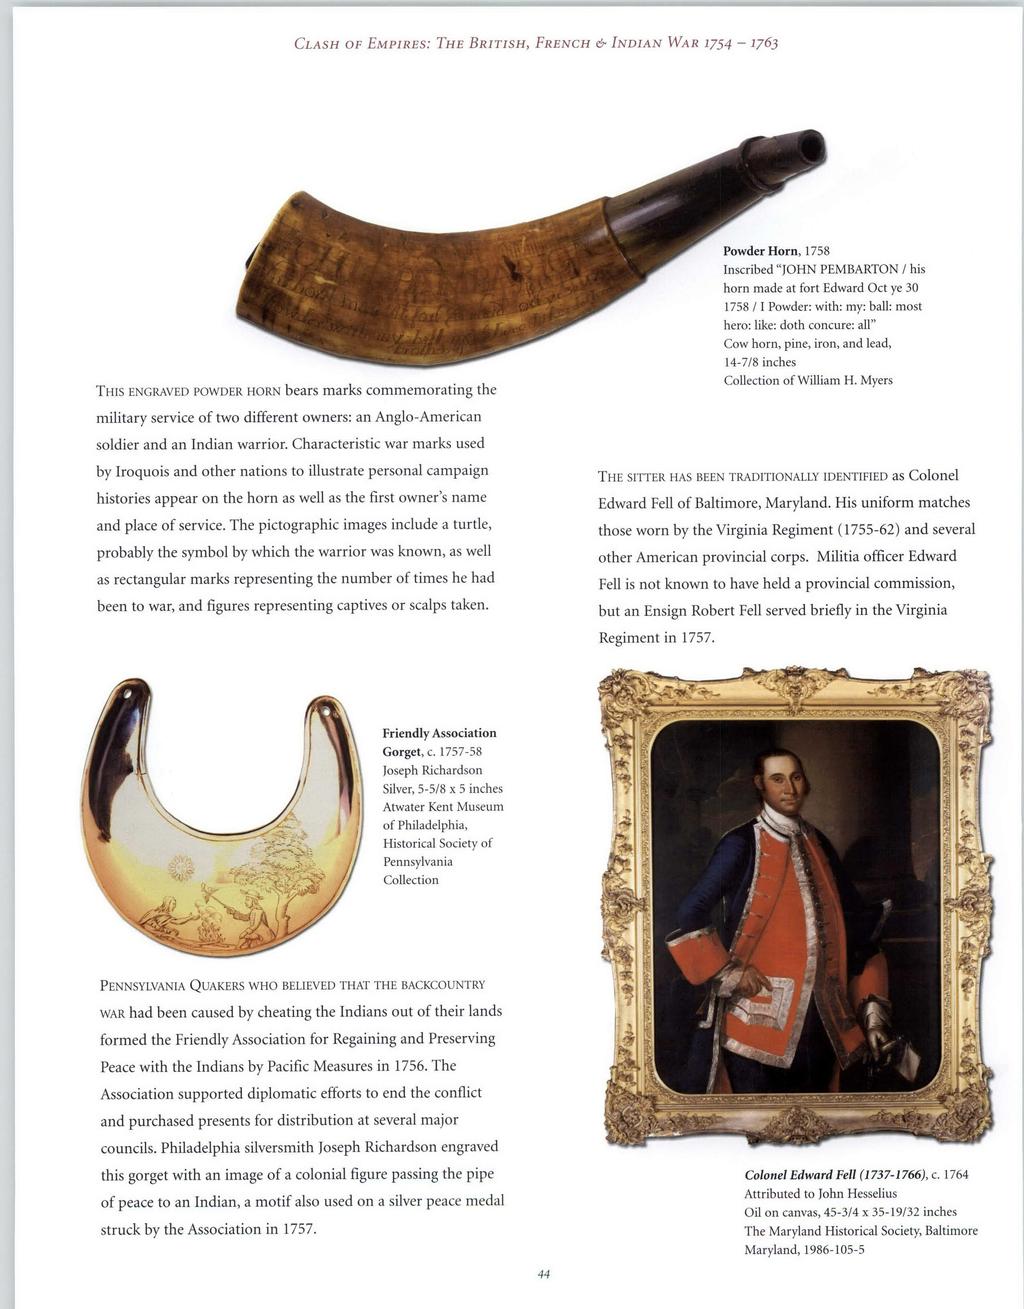 CLASH OF EMPIRES: THE BRITISH, FRENCH & INDIAN WAR 1754-1763 MBARTON / his dward Oct ye 30 h: my: ball: most ure: all", and lead, THIS ENGRAVED POWDER HORN bears marks commemorating the military